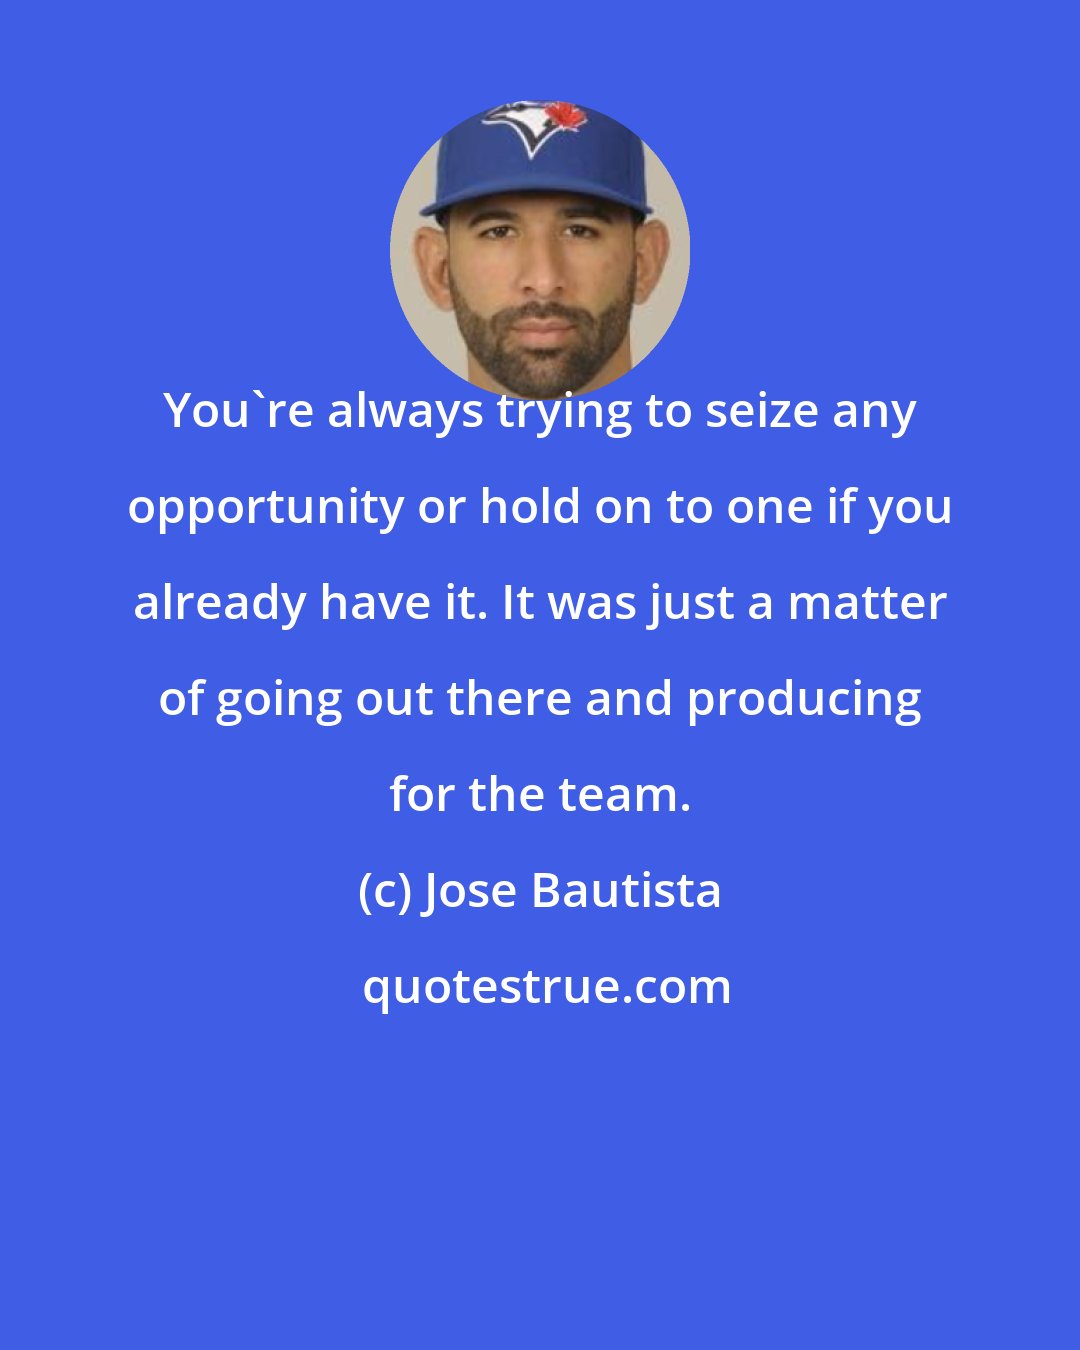 Jose Bautista: You're always trying to seize any opportunity or hold on to one if you already have it. It was just a matter of going out there and producing for the team.